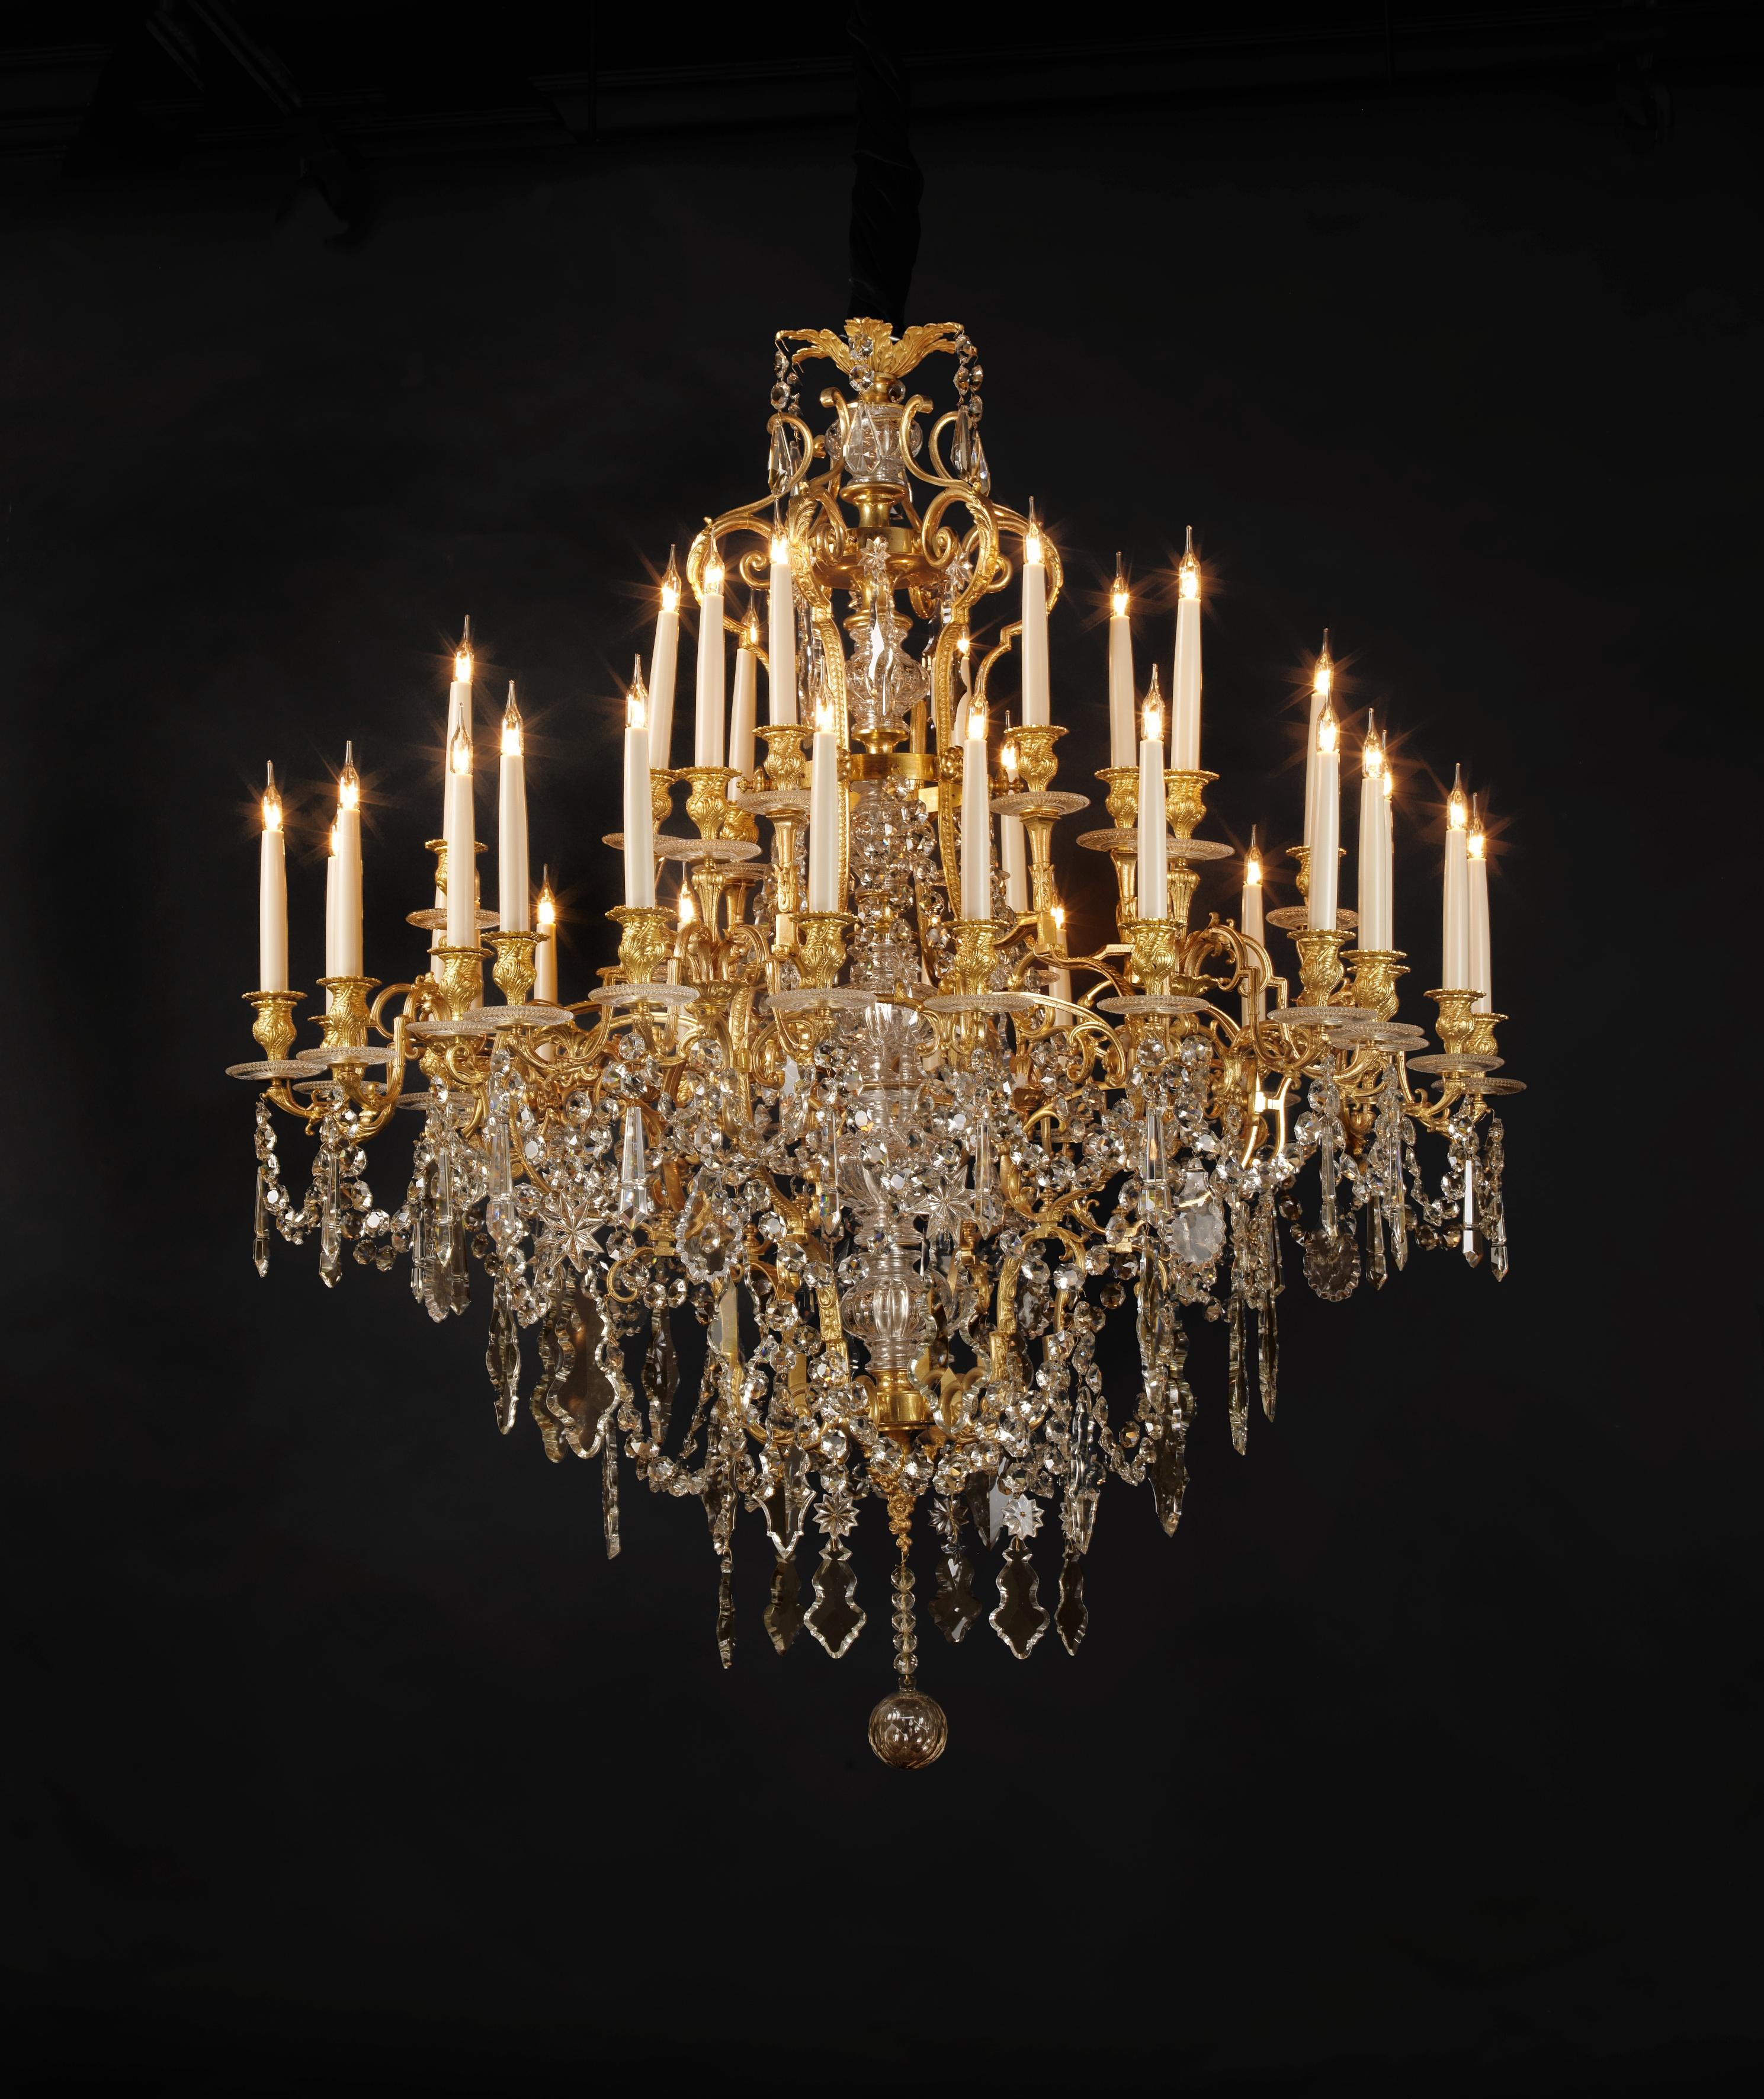 A large and impressive Napoléon III gilt bronze and cut-glass thirty-six light chandelier.

French, circa 1870. 

This fine chandelier has a gilt bronze frame issuing scrolling foliate candle arms terminating in circular glass drip-trays and